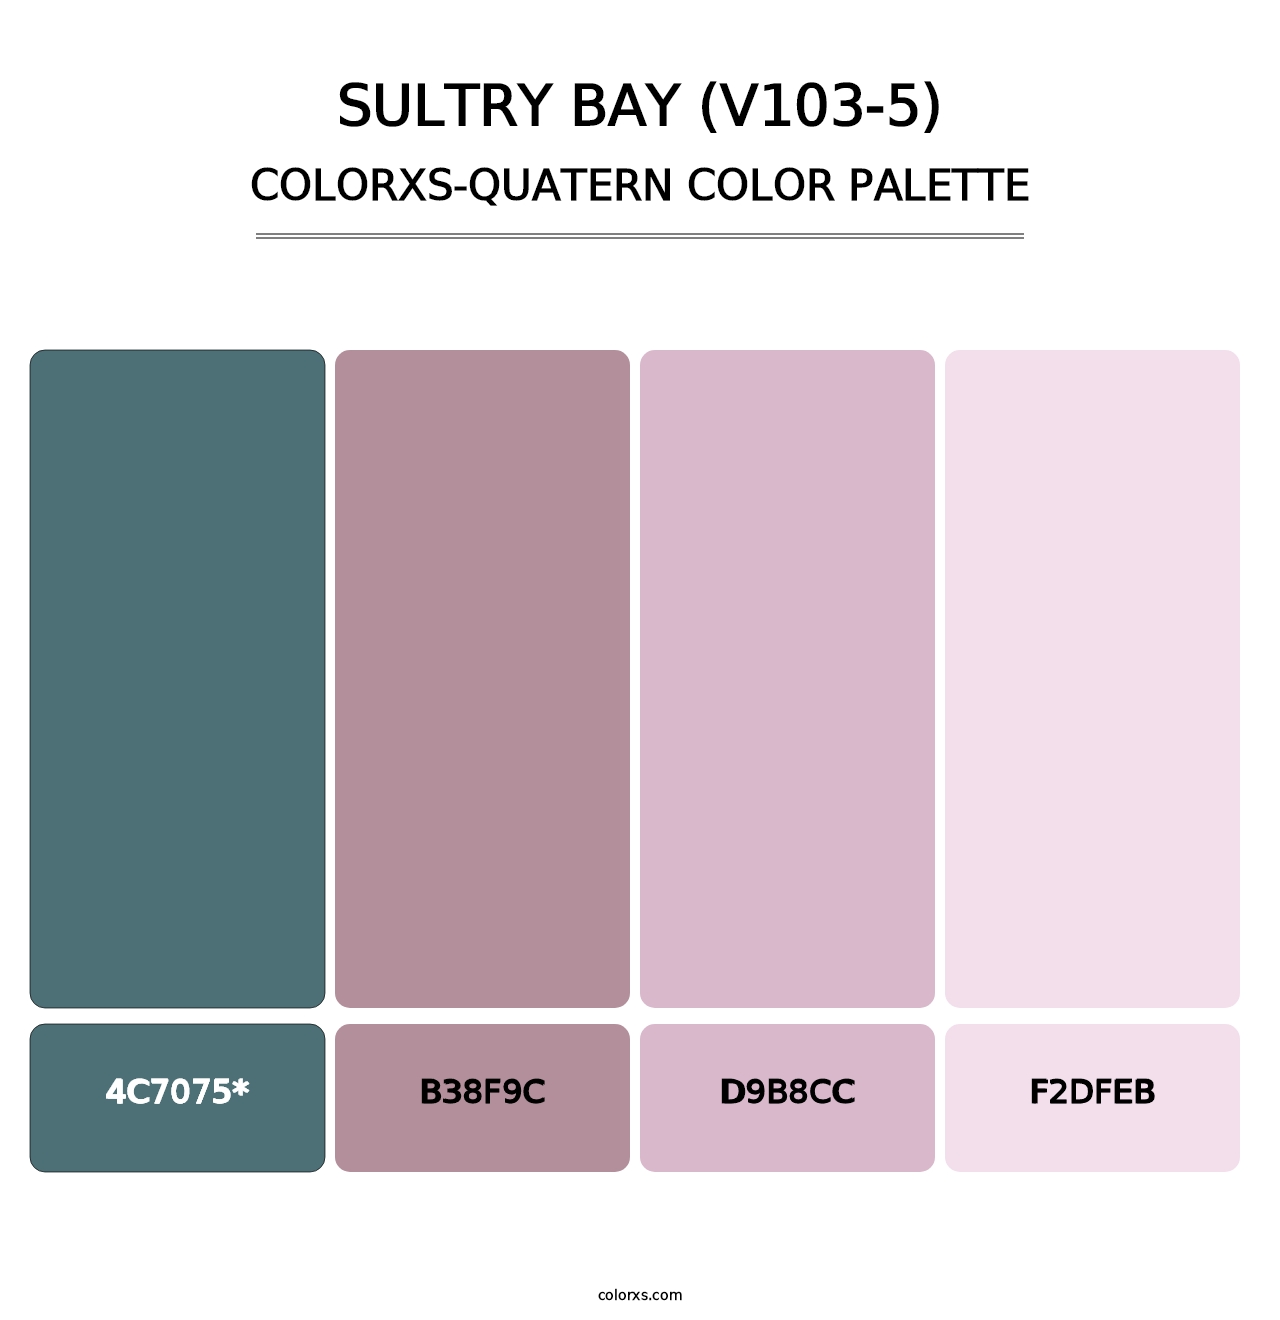 Sultry Bay (V103-5) - Colorxs Quatern Palette